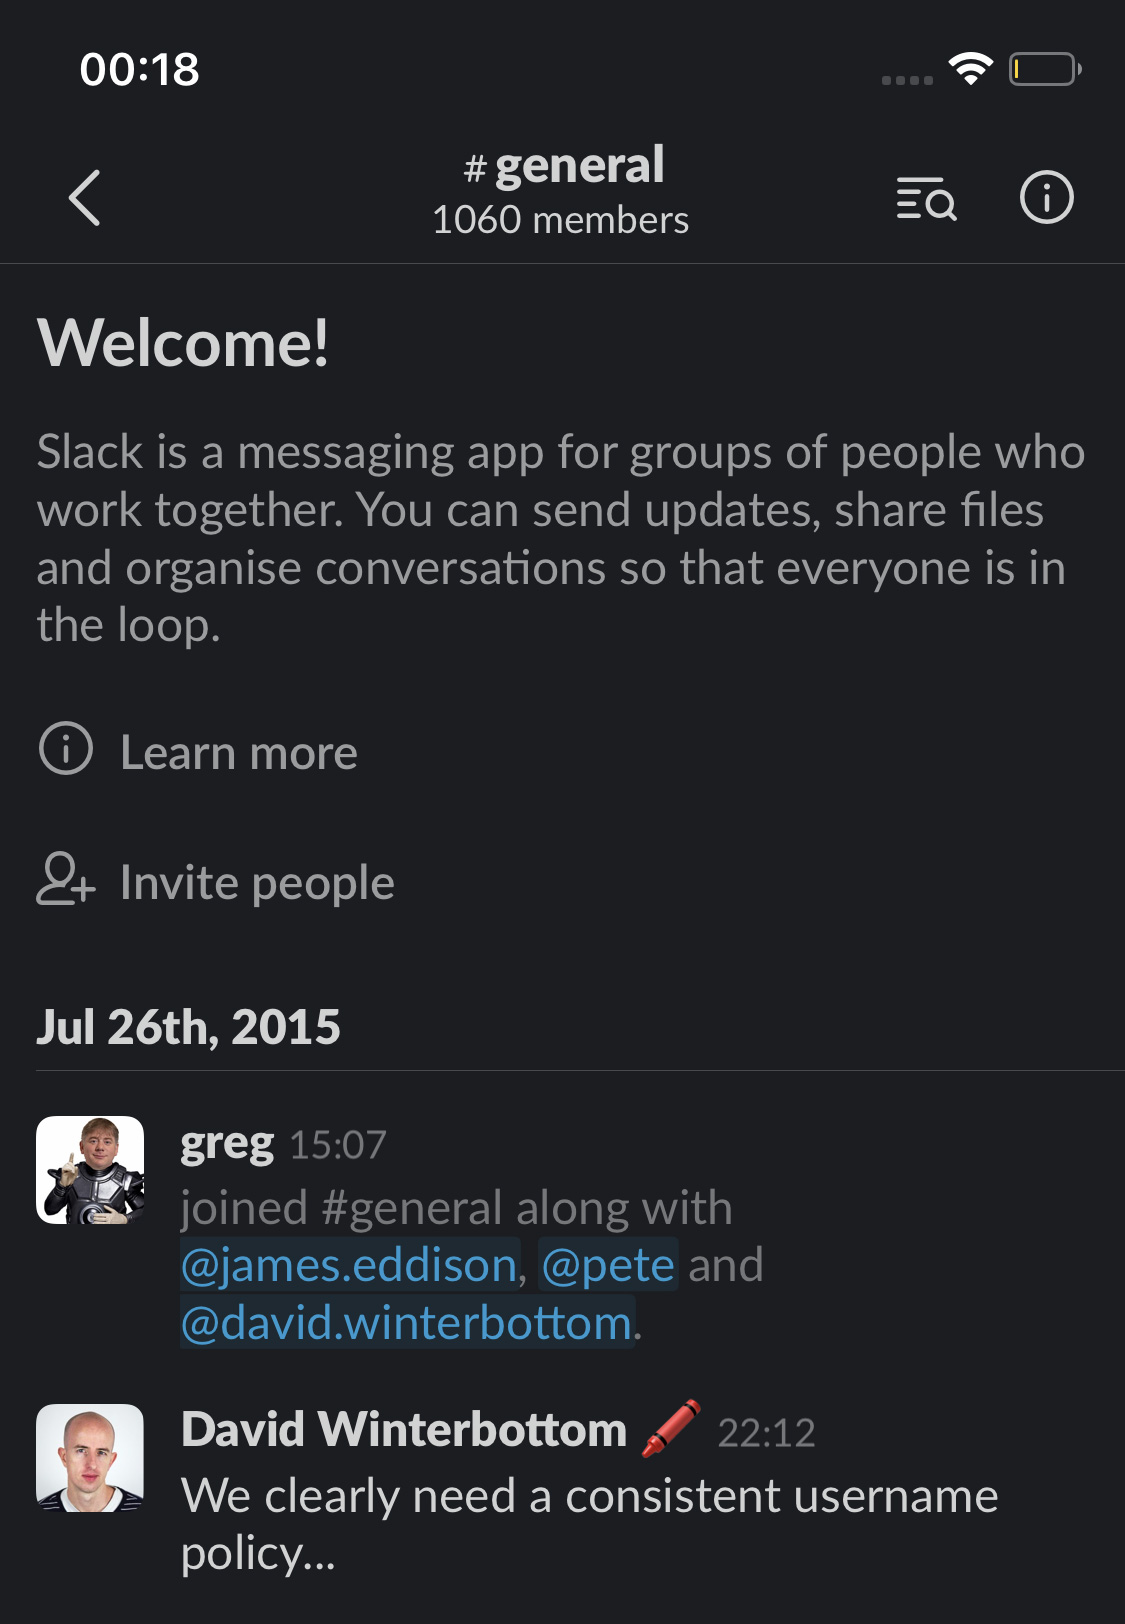 The first message ever posted in slack. It was David, our head of engineering, saying that we need a consistent username policy, after three people joined all with a different style of username